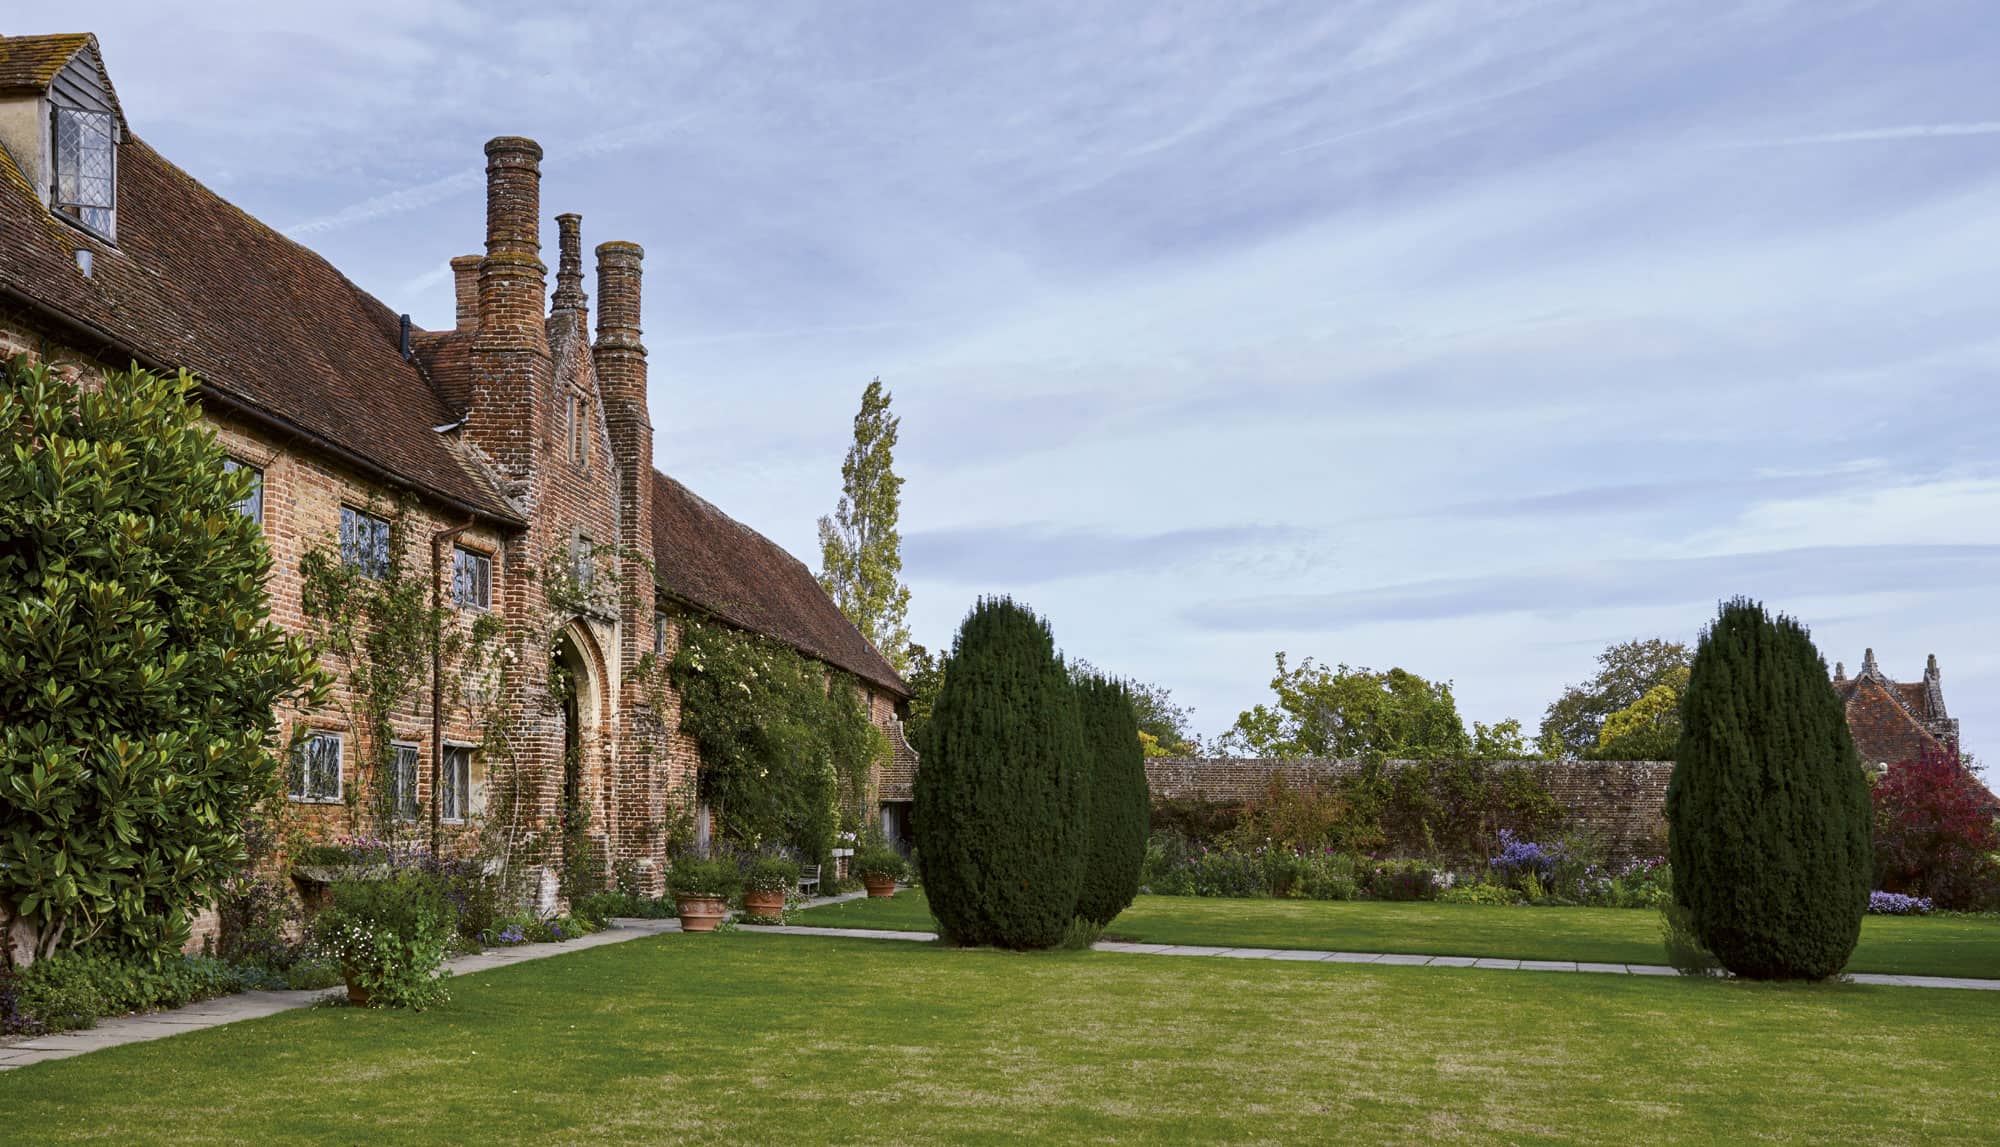 The Top Courtyard at Sissinghurst Castle acquired in 1930 by Harold Nicolson - photo 3